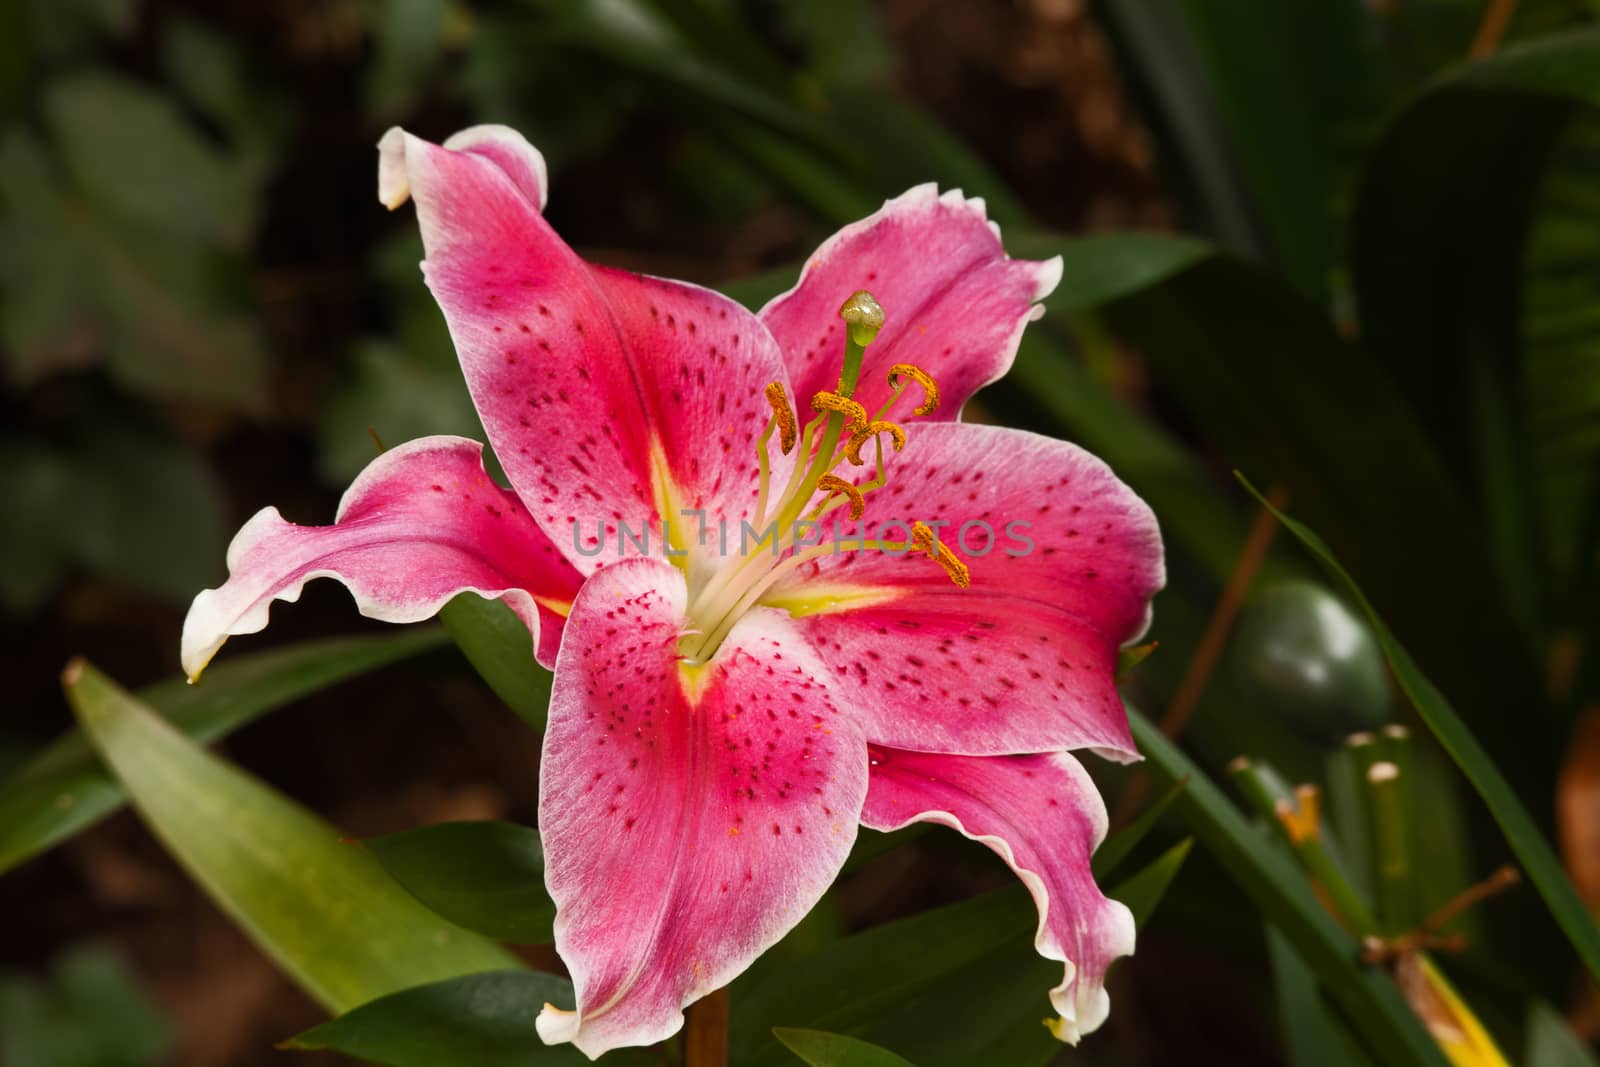 Macro image of the flower of a pink Oriental Lily.